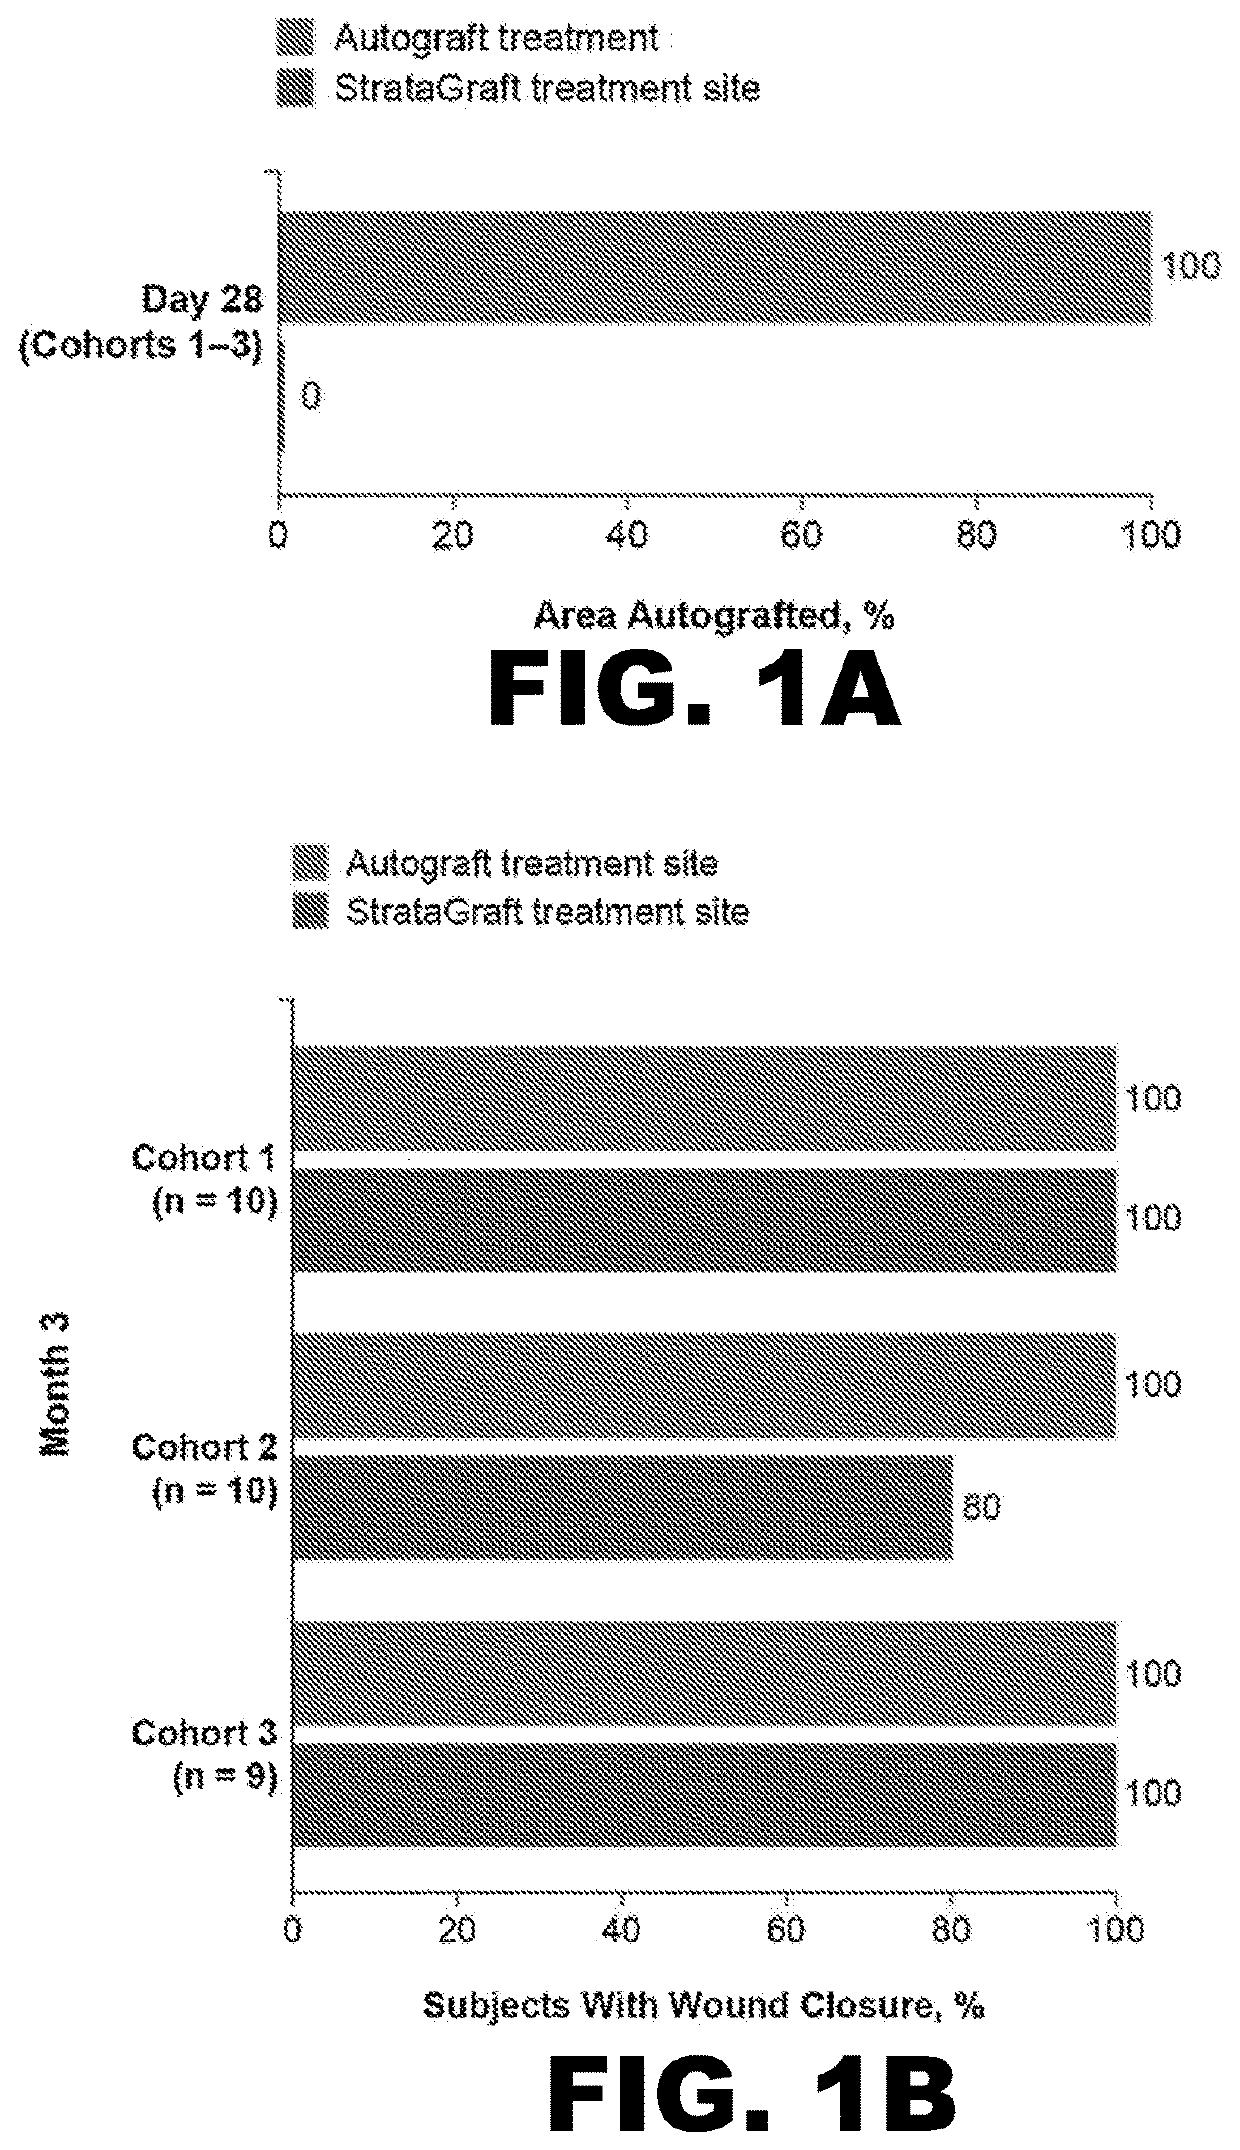 Methods for treating acute wounds and improving outcomes